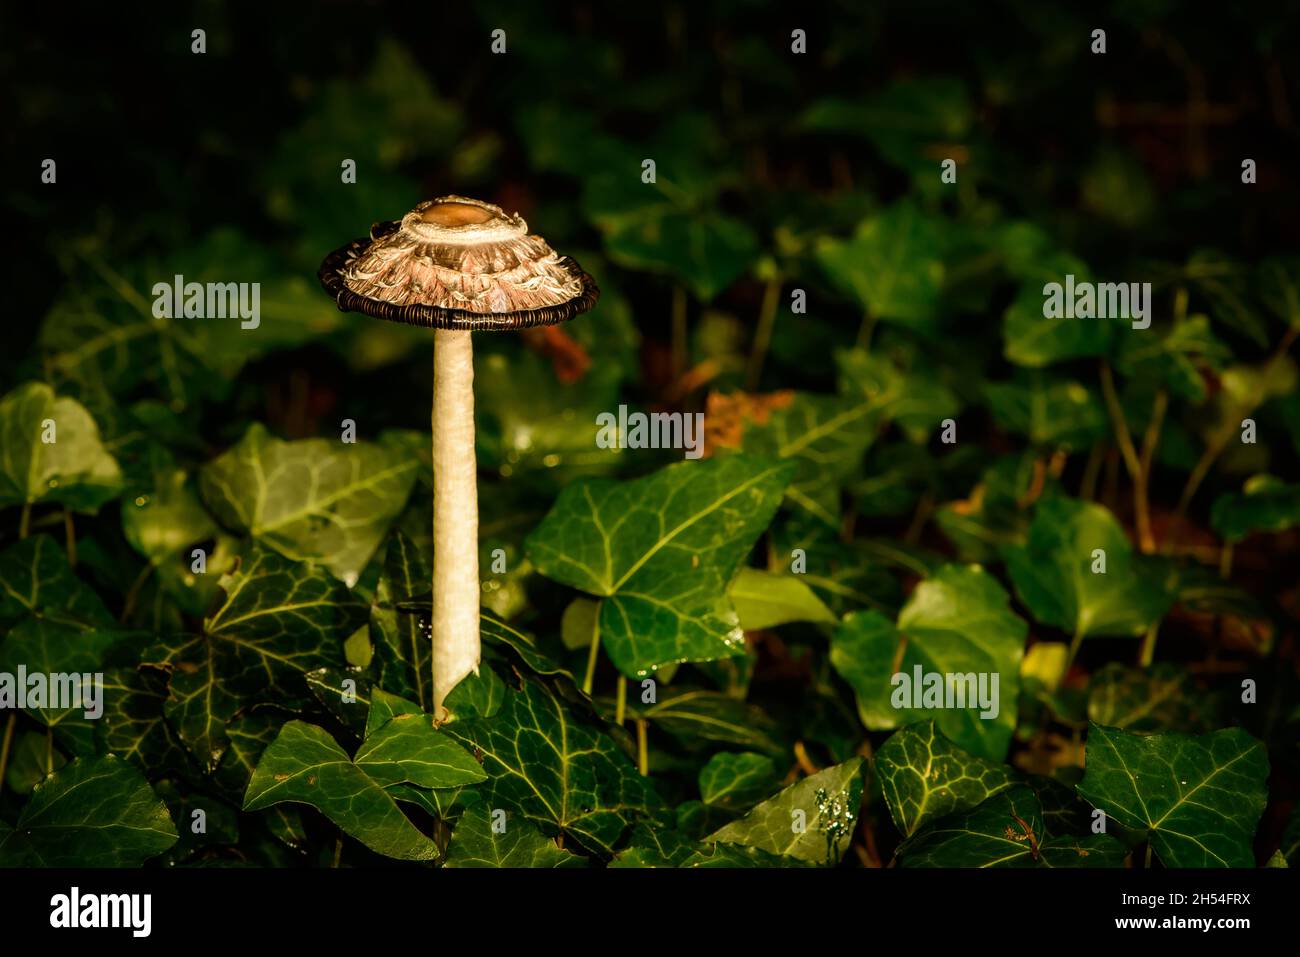 Brownish ink fungus on a long stem against a dark background of ivy leaves Stock Photo